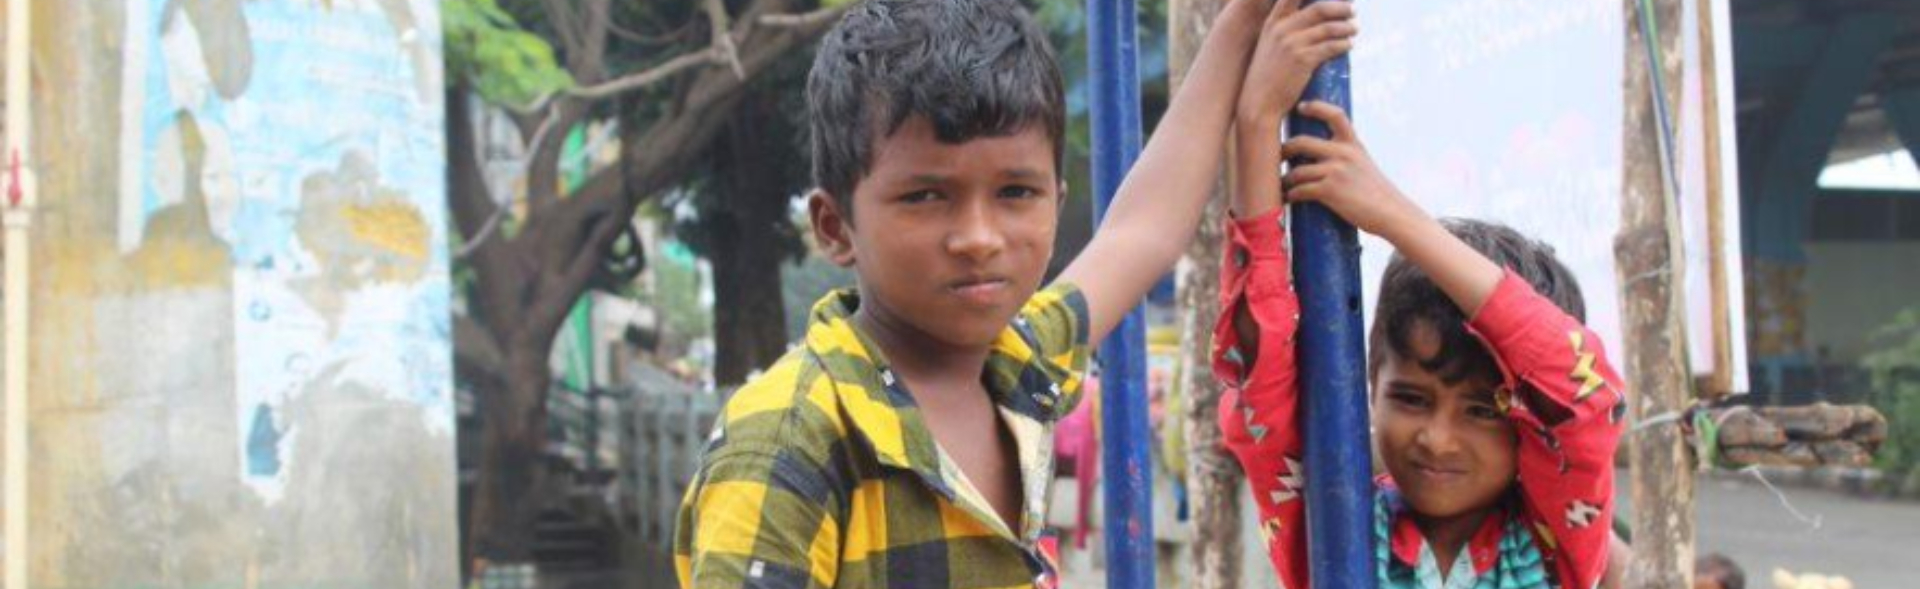 child beggars in india save the children